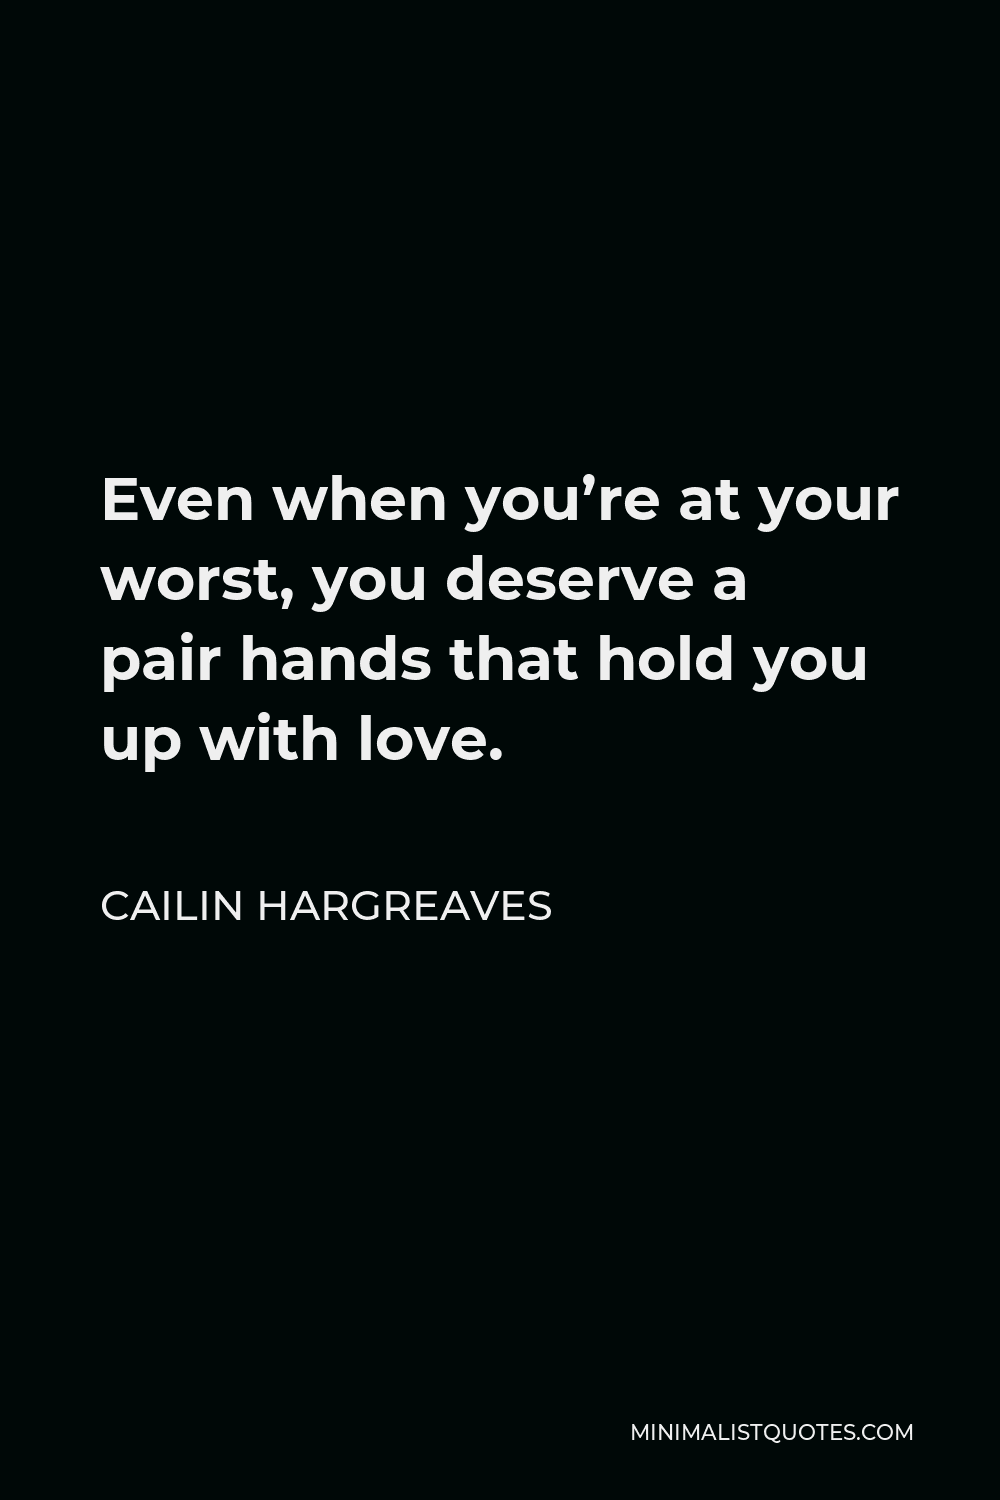 Cailin Hargreaves Quote - Even when you’re at your worst, you deserve a pair hands that hold you up with love.